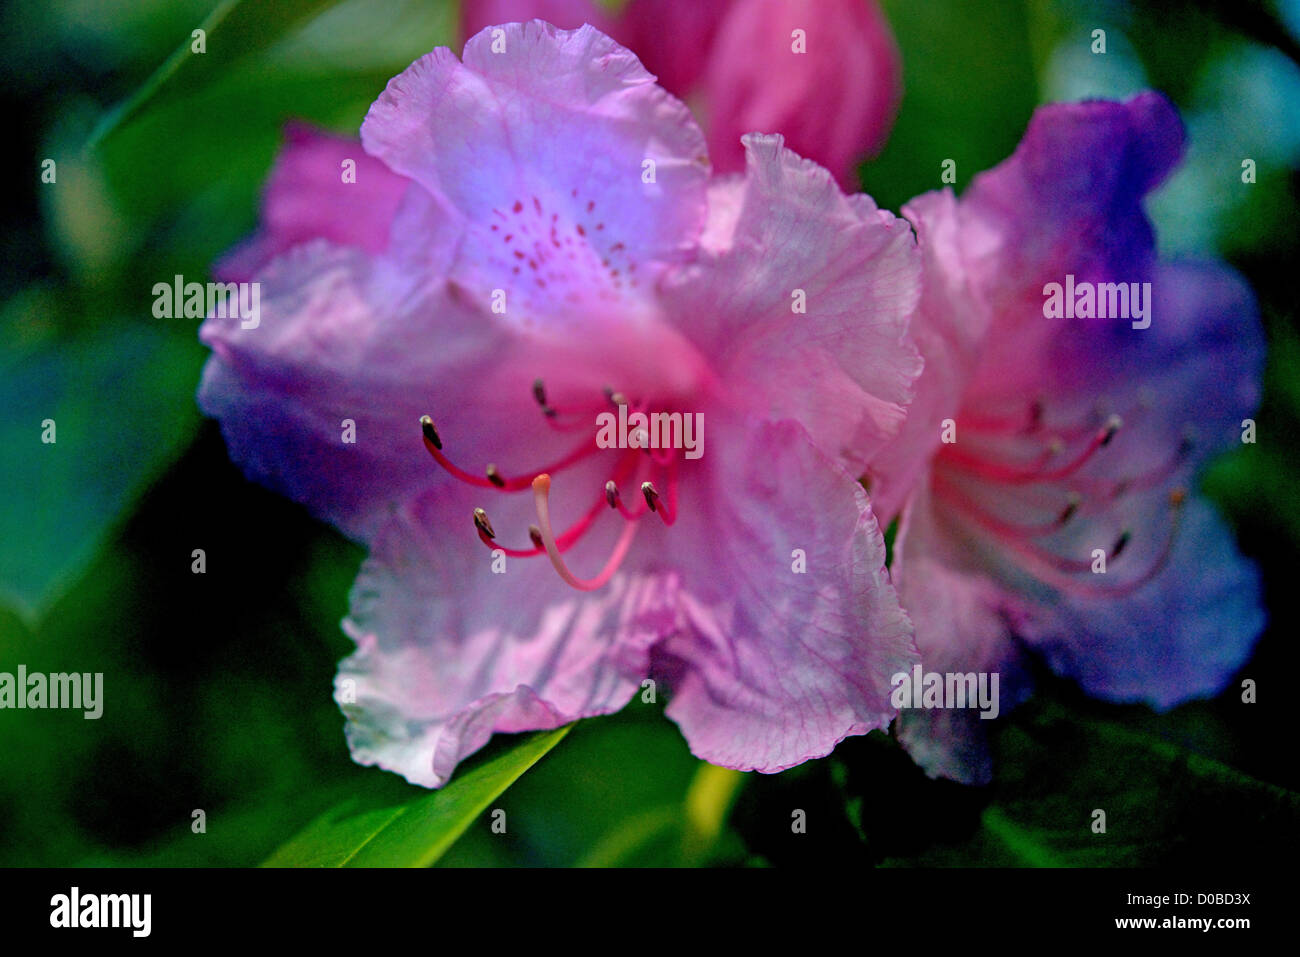 Pink Pearl Rhododendron in a Creative Composite Montage Image Stock Photo